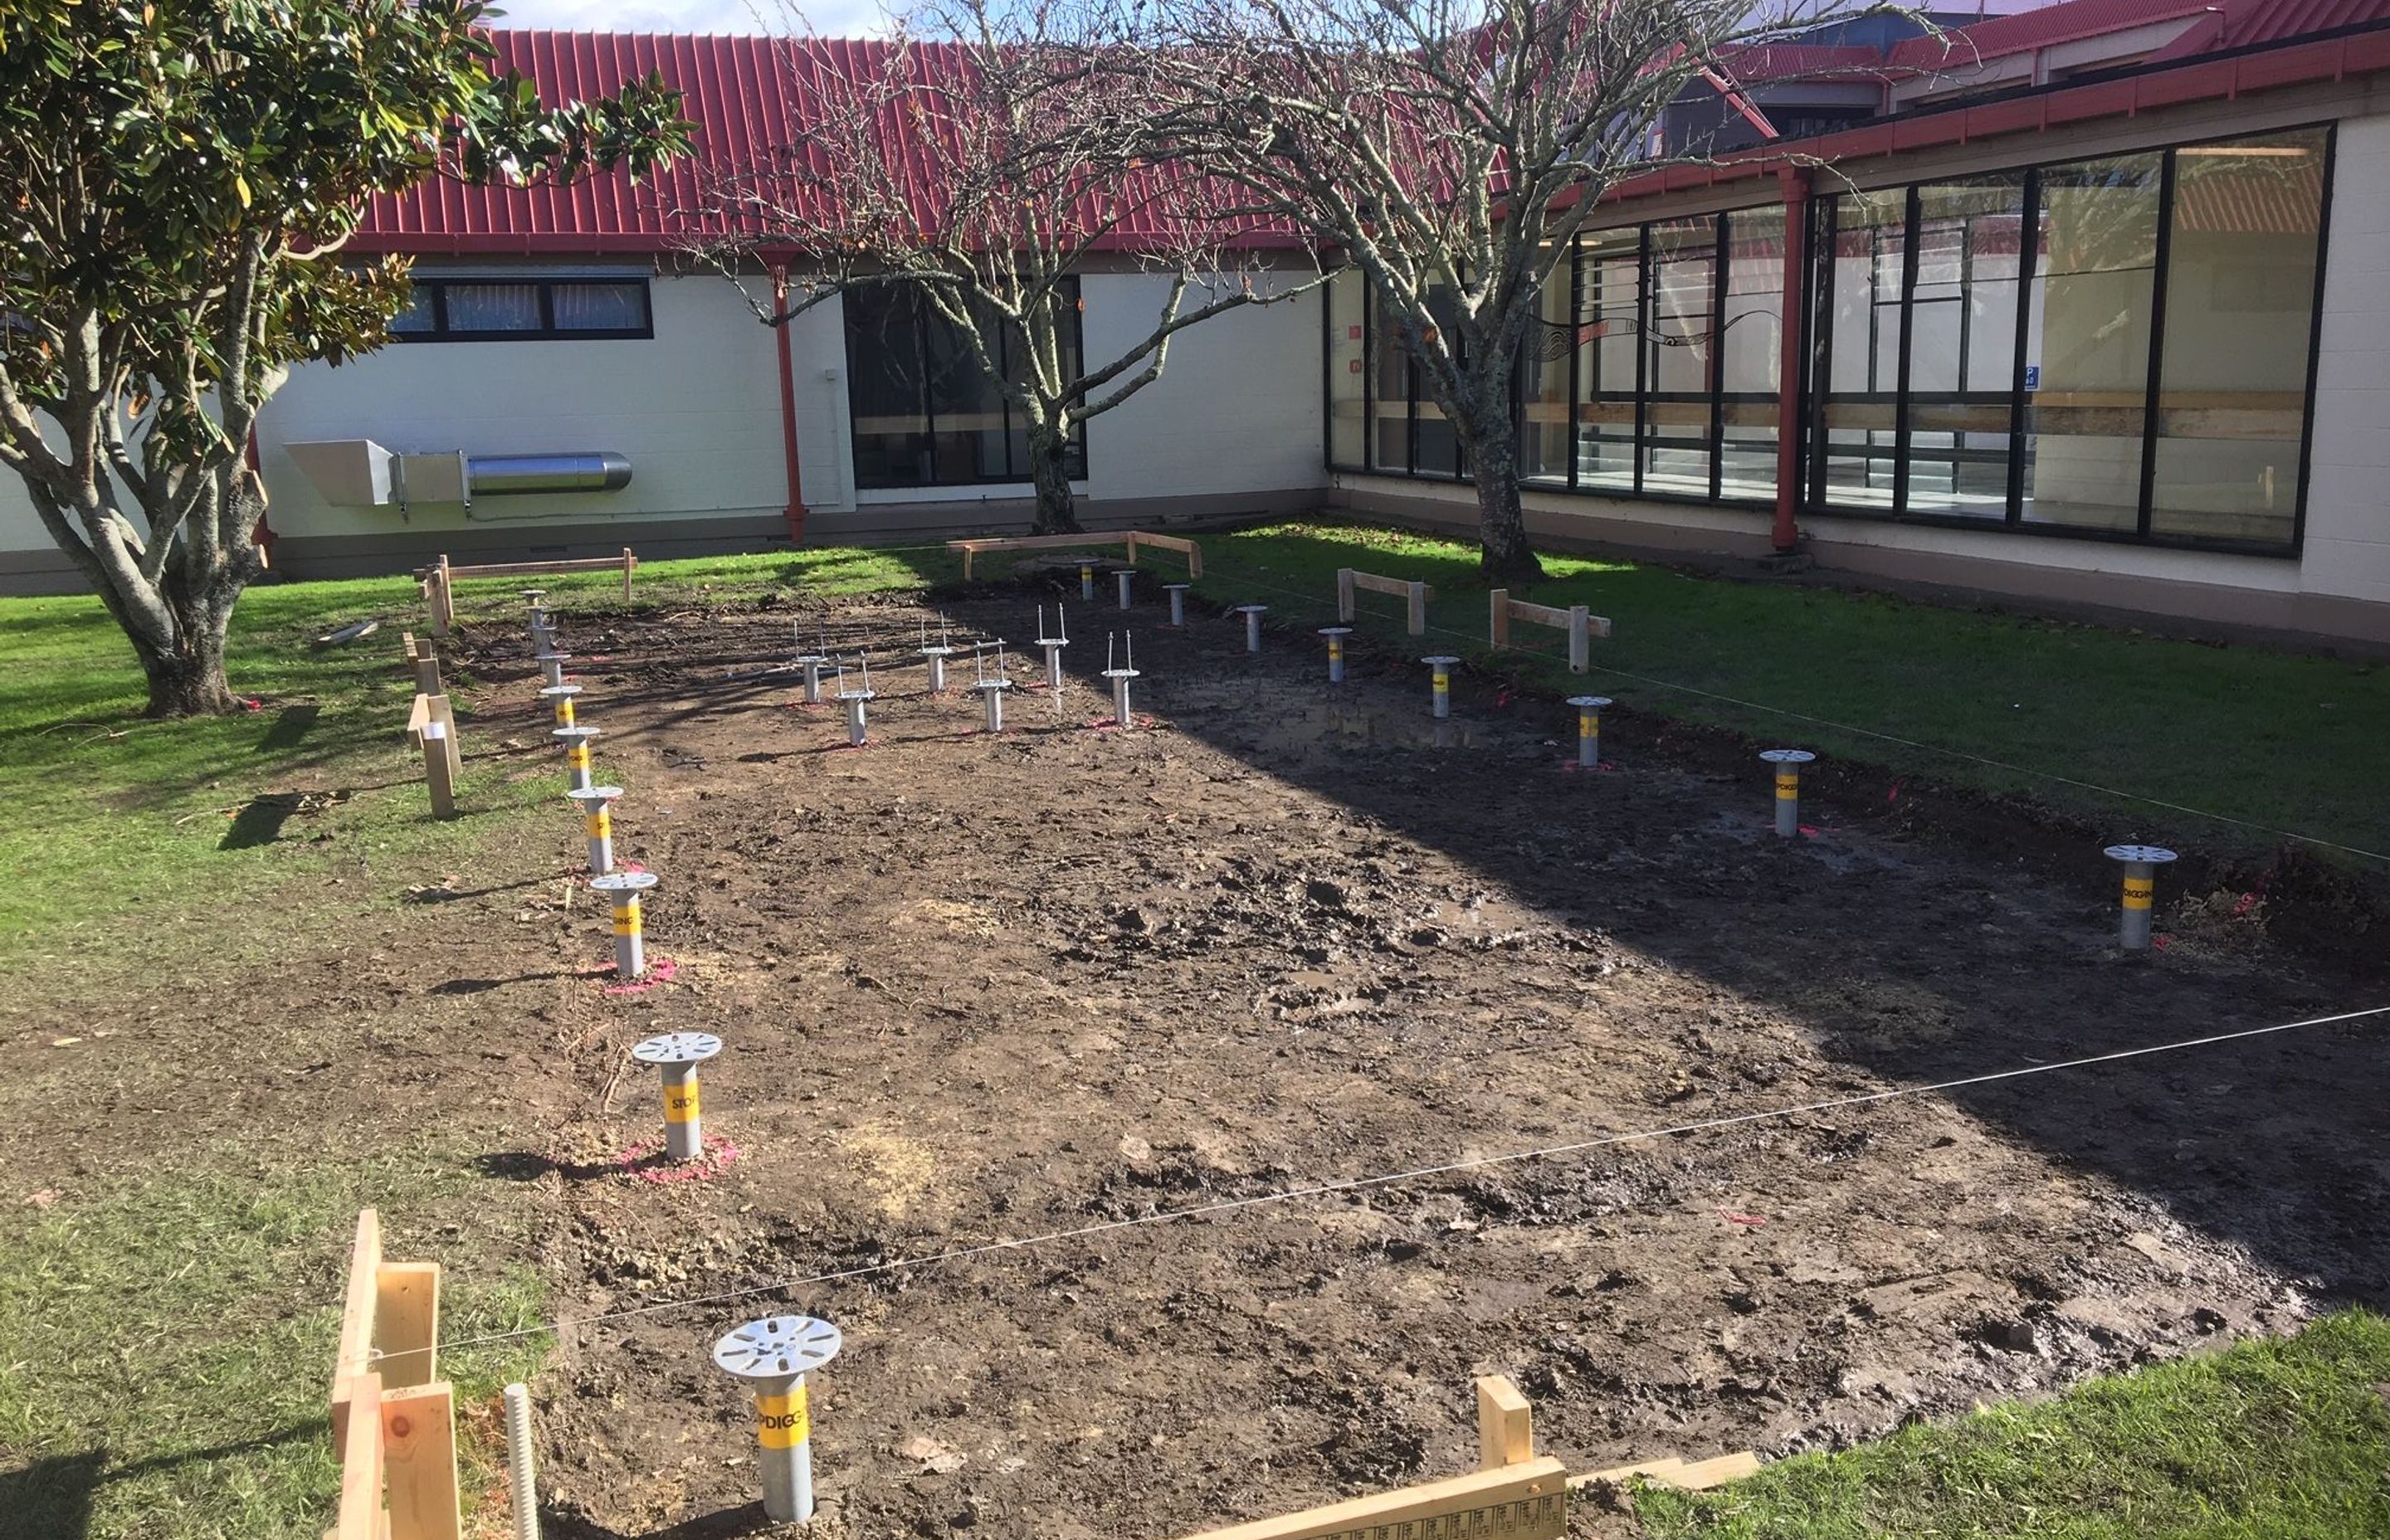 A series of ground screws were installed at Gisborne Hospital for the installation of an MRI facility. Should the MRI facility no longer be needed, the screws can be simply removed and the site restored to lawn.